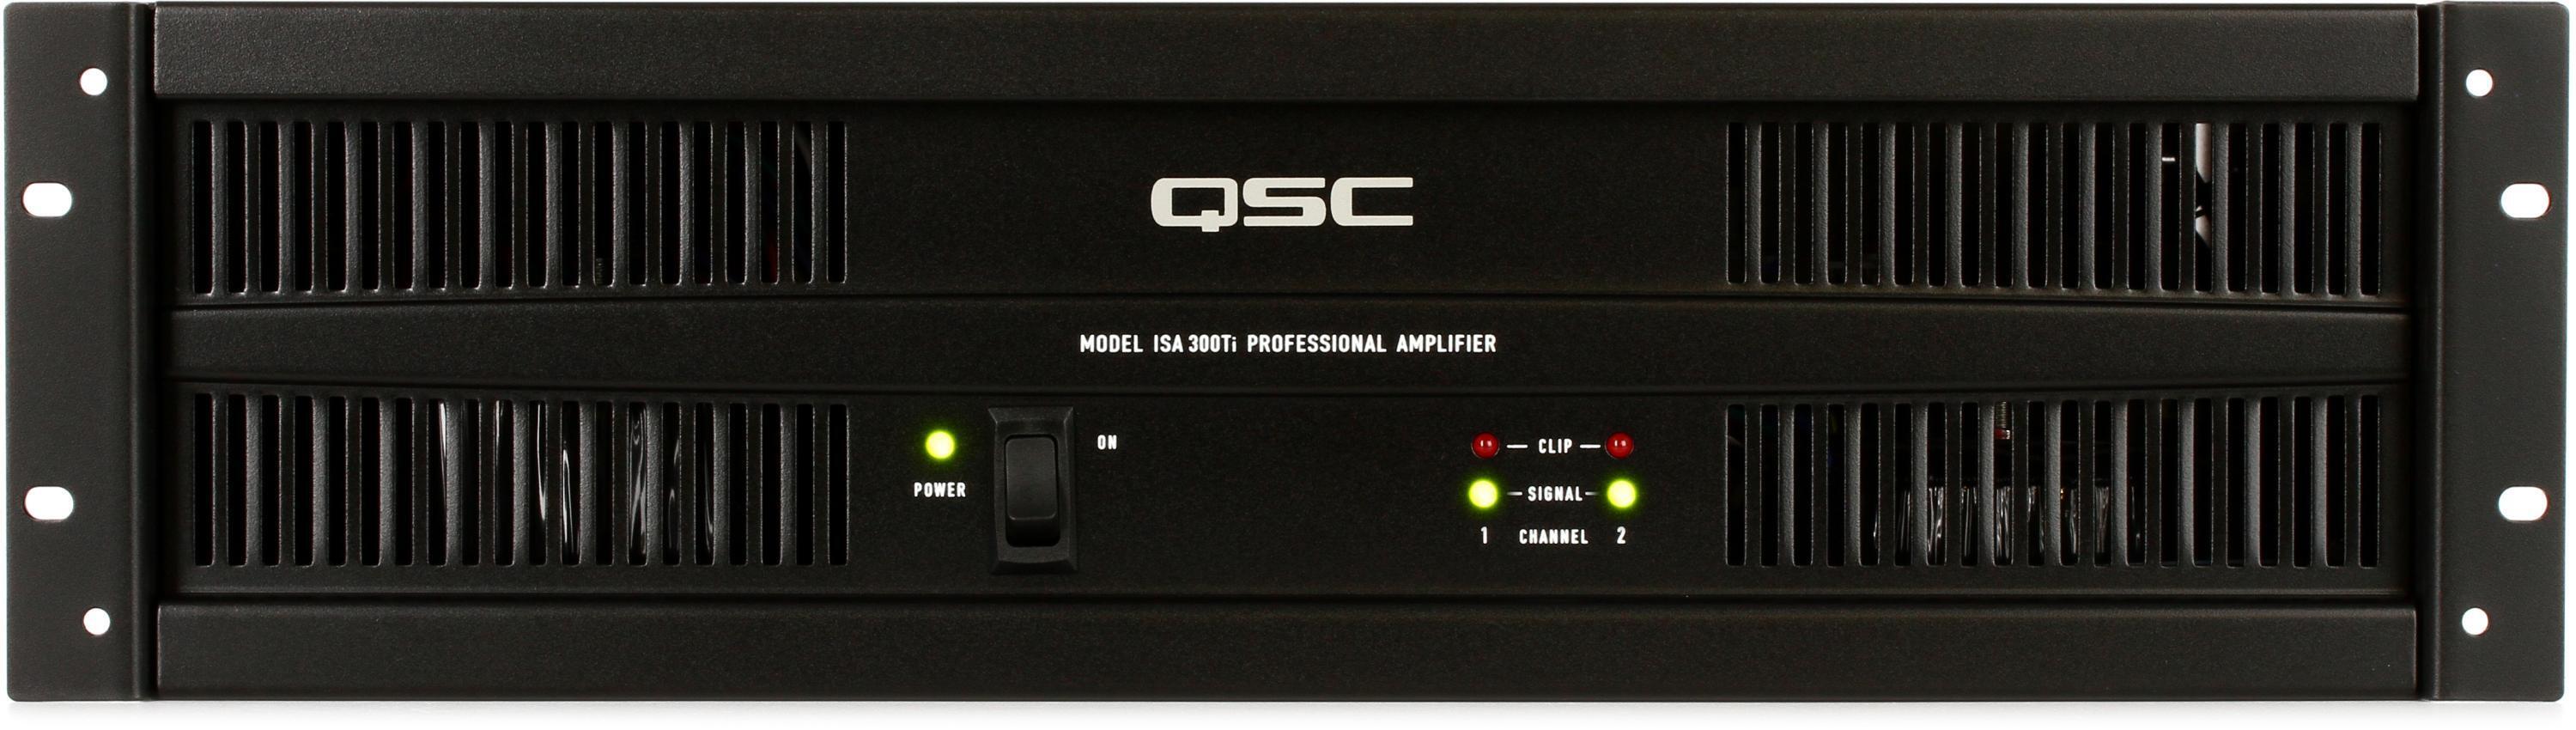 QSC ISA500Ti 2-channel 500W 70V/100V Power Amplifier | Sweetwater